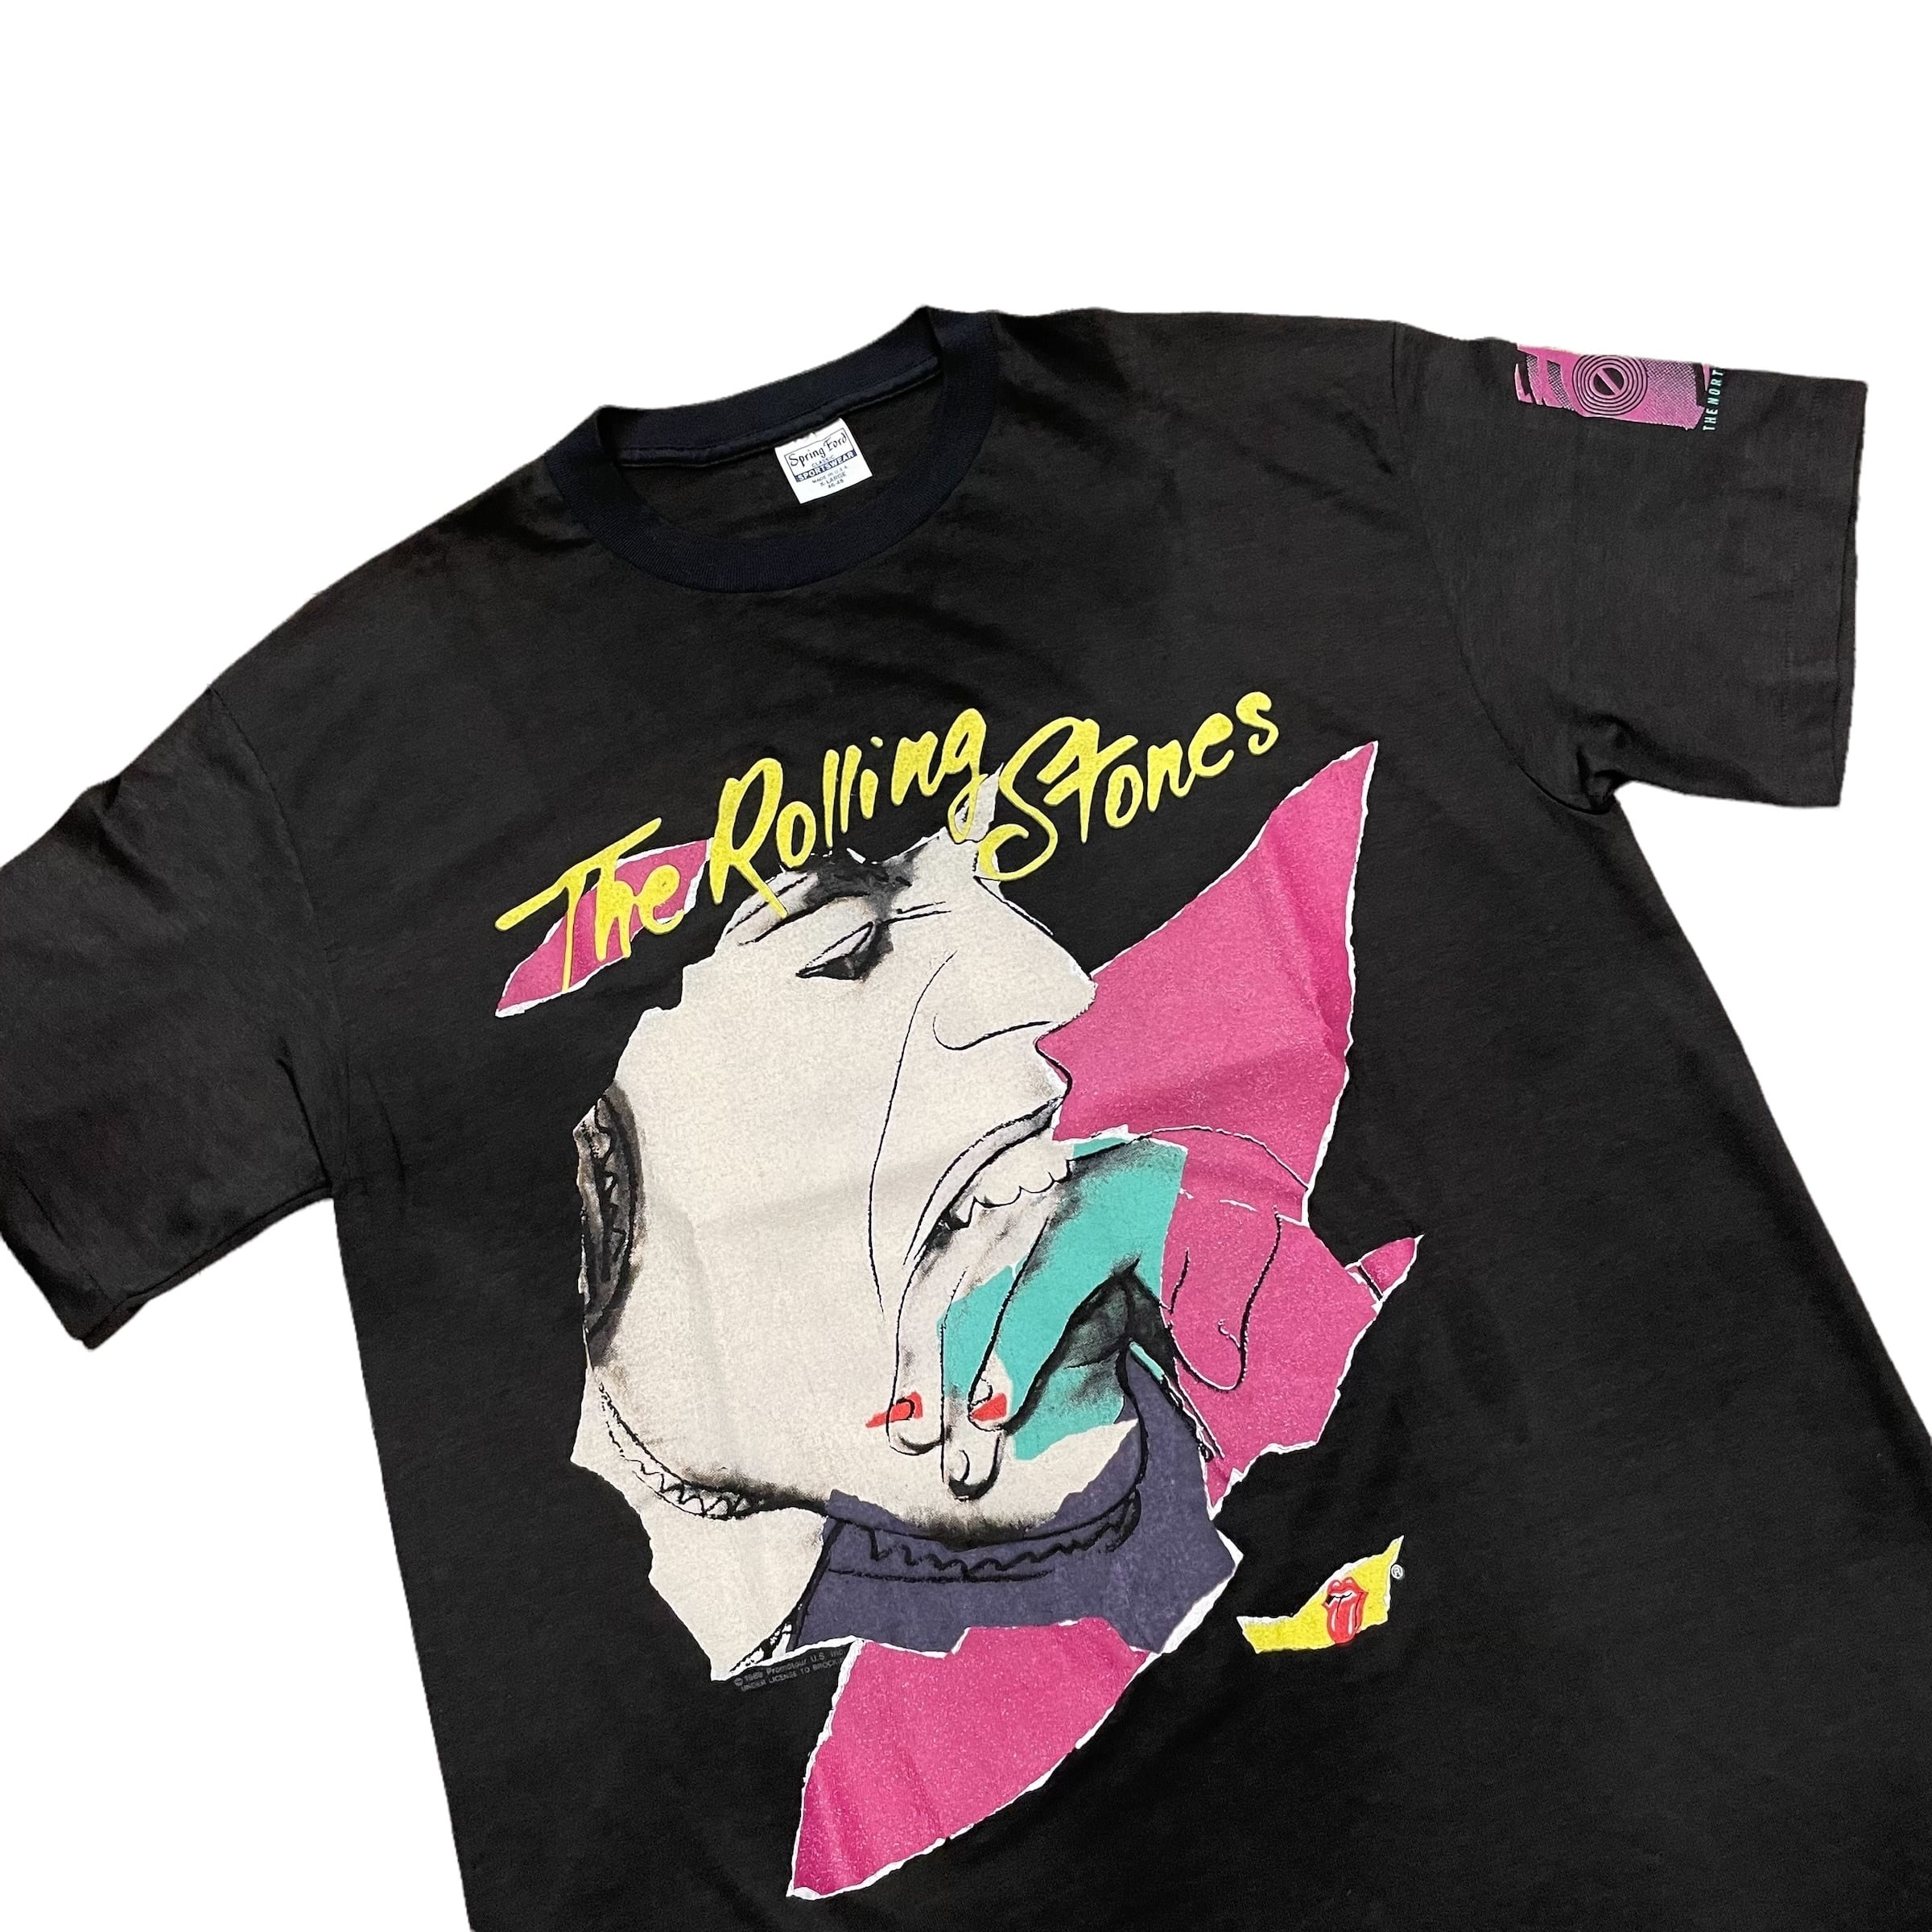 THE ROLLING STONES MADE IN USA T-SHIRT